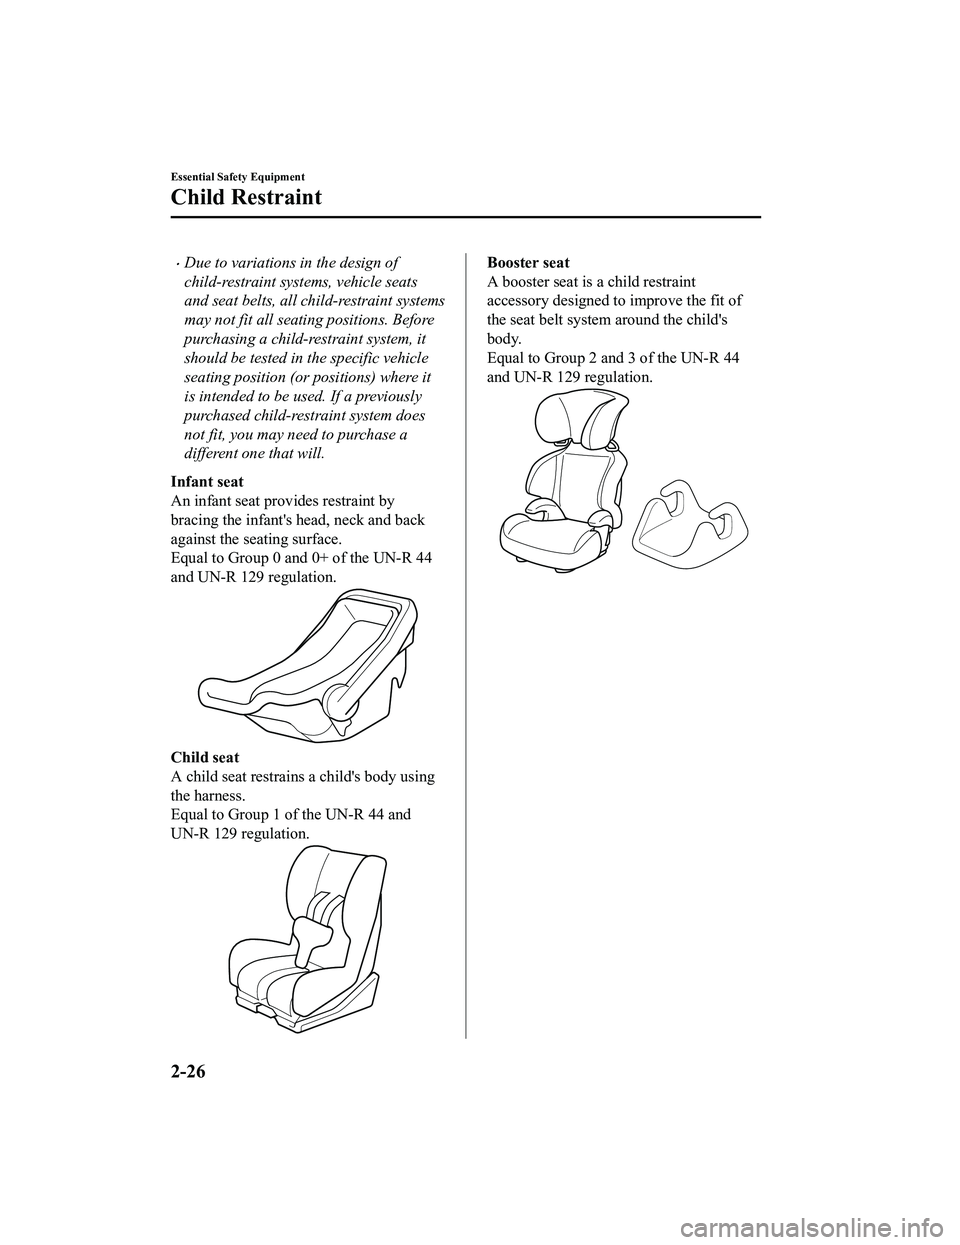 MAZDA MODEL MX-5 MIATA RF 2022 Service Manual Due to variations in the design of
child-restraint systems, vehicle seats
and seat belts, all child-restraint systems
may not fit all seating positions. Before
purchasing a child-restraint system, 